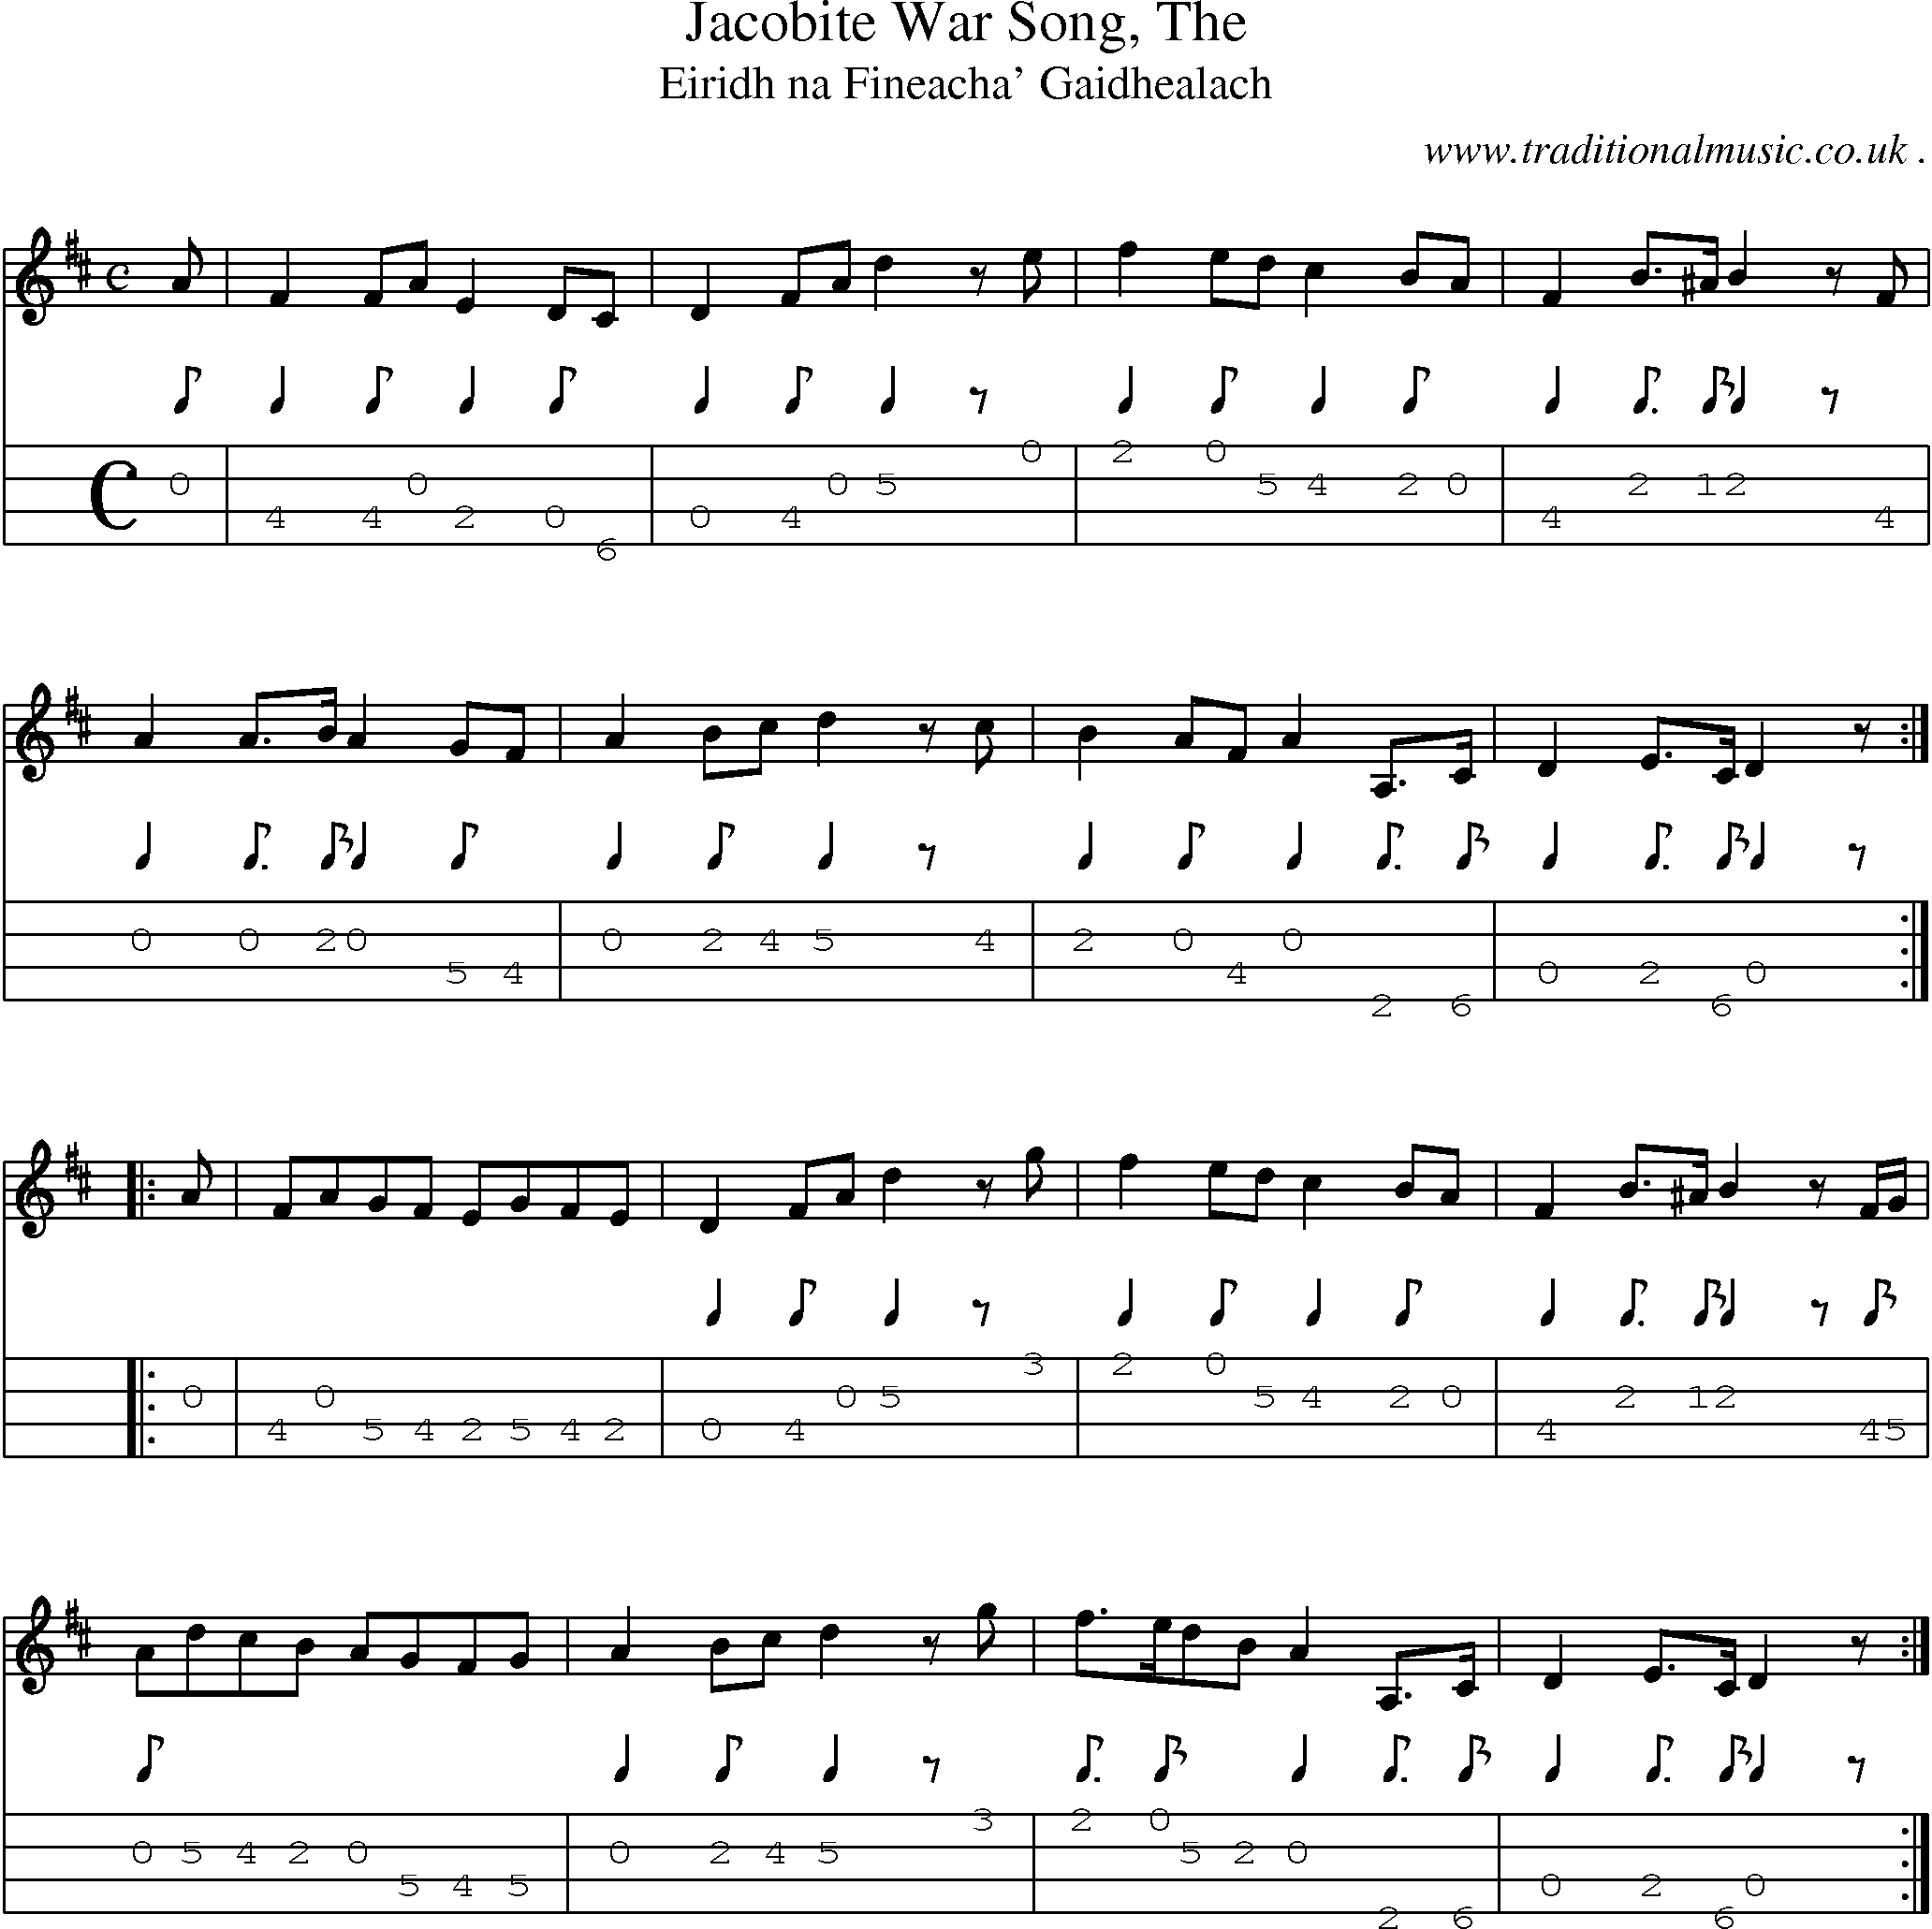 Sheet-music  score, Chords and Mandolin Tabs for Jacobite War Song The